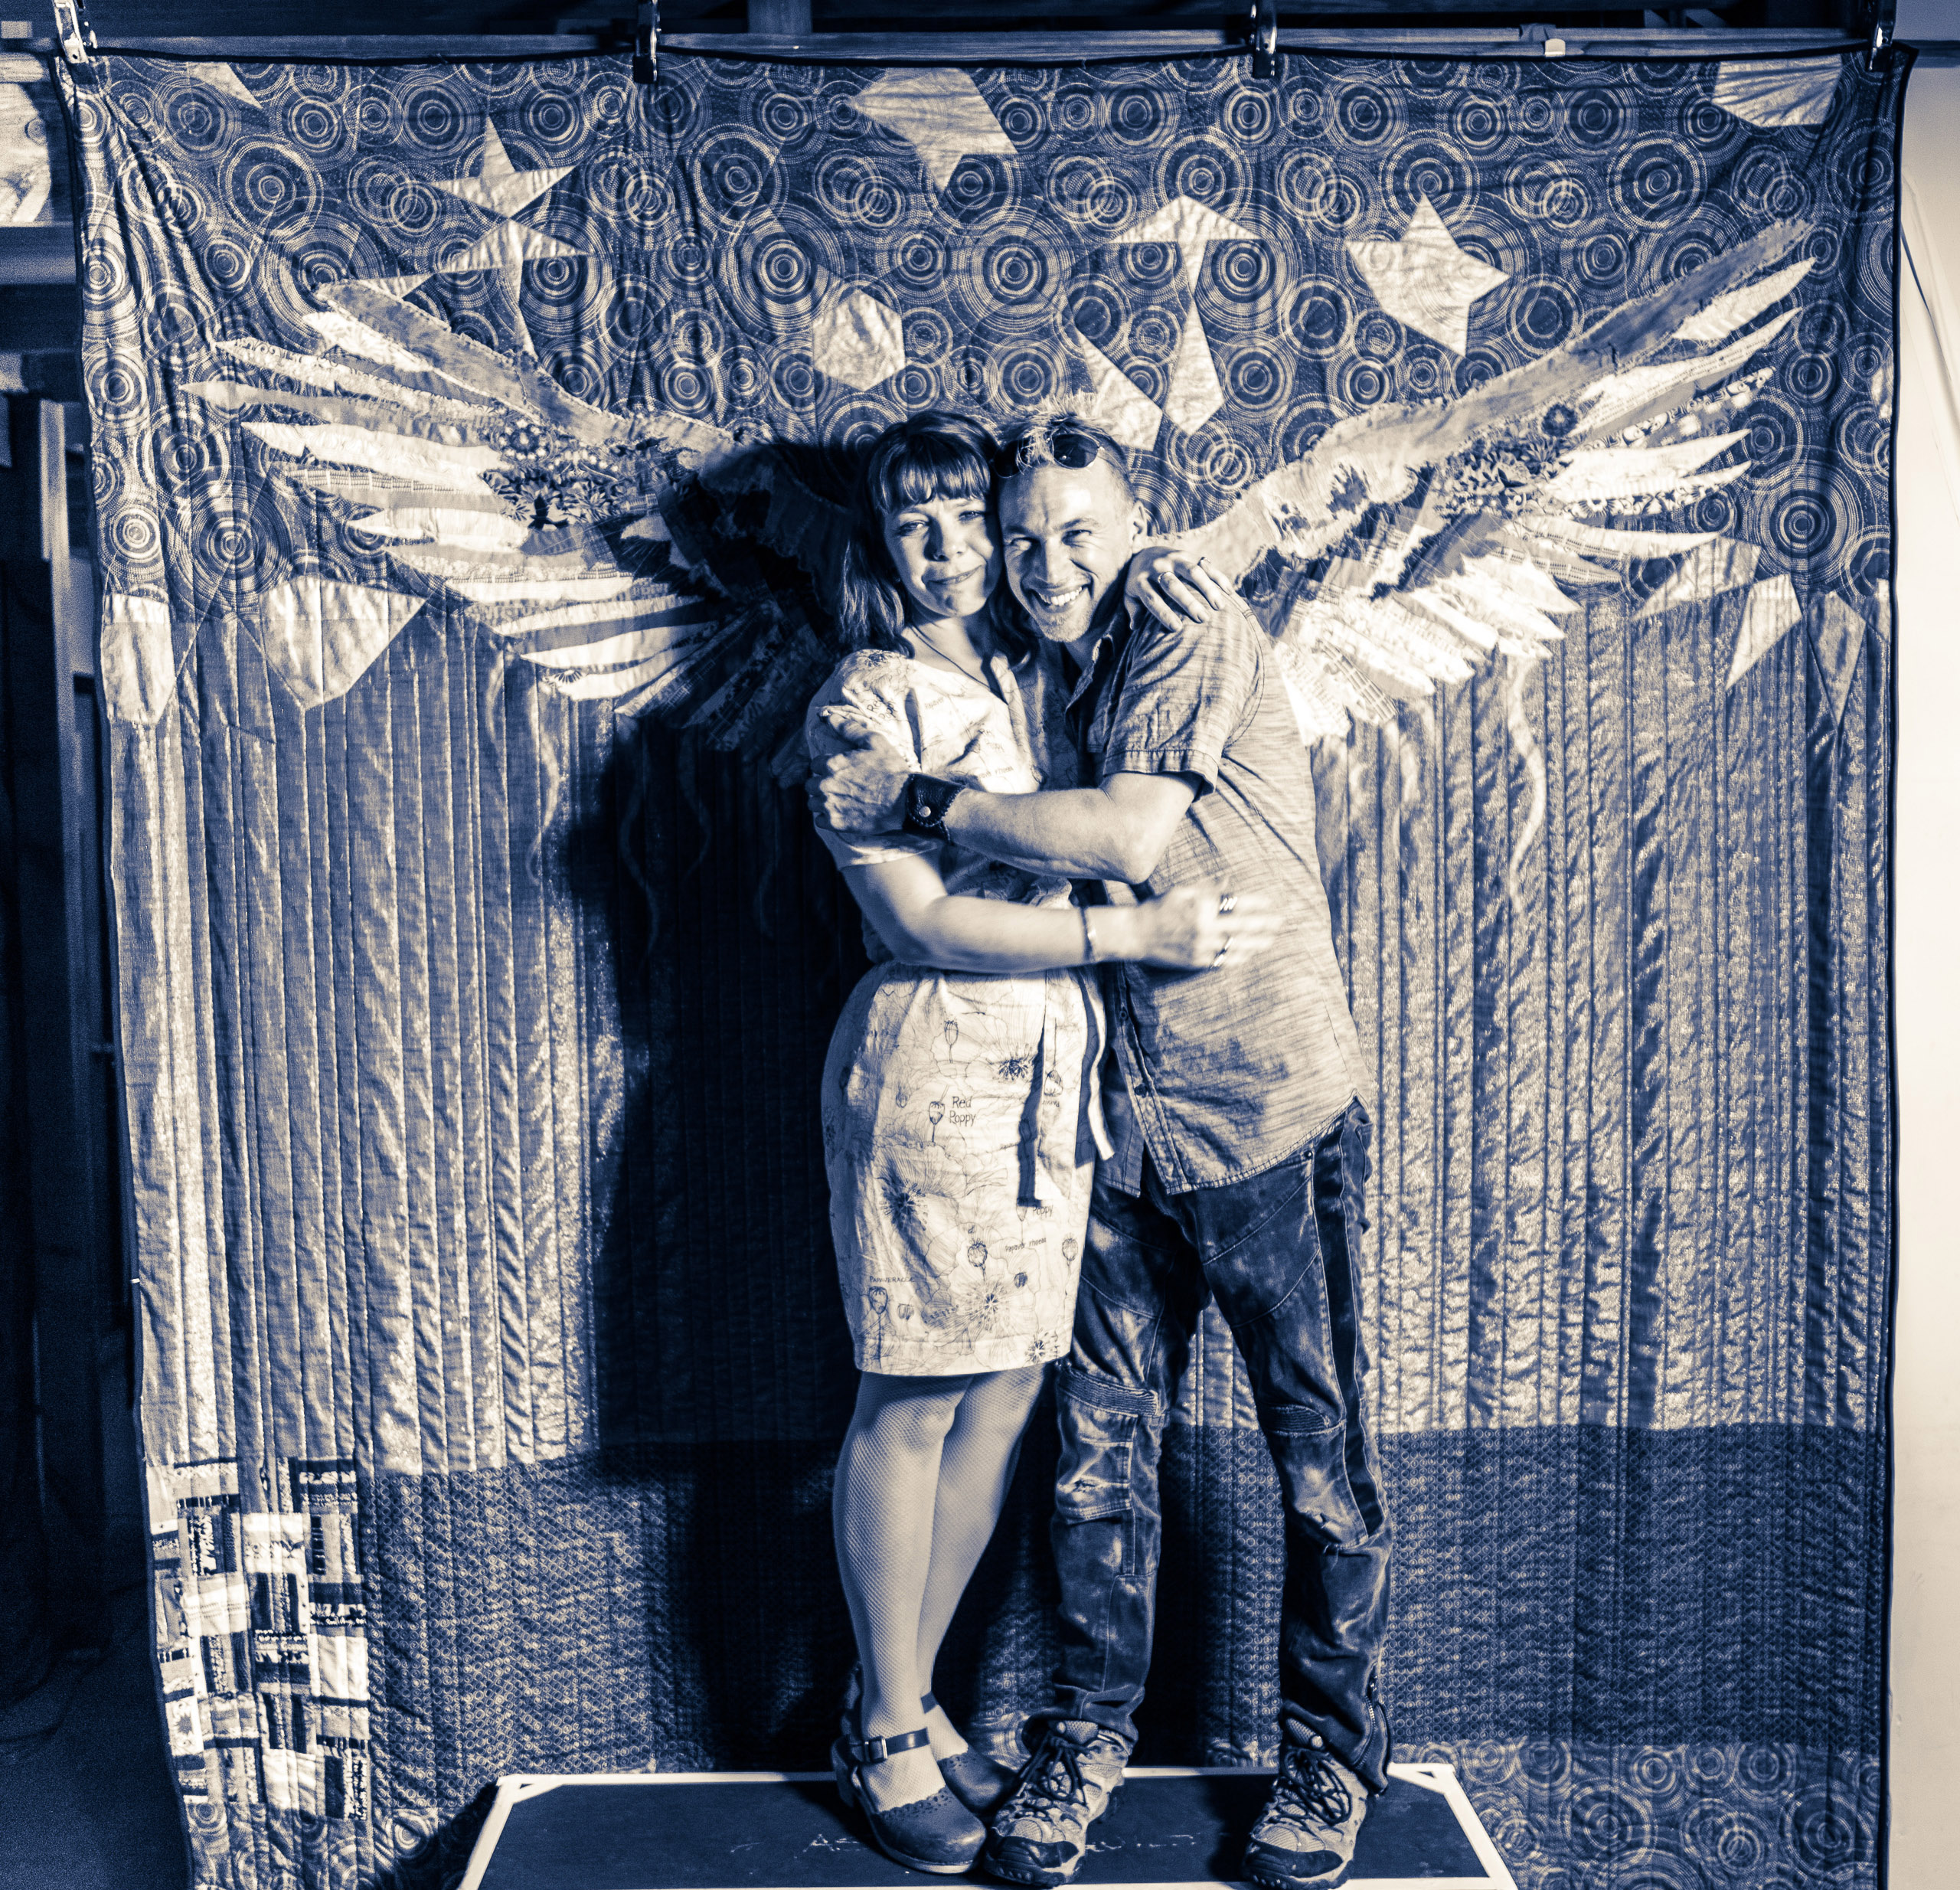 Jason "Hawke" Hamilton and Teresa Coates standing in front of their Ascension Quilt in Hamilton's loft at the Brewery Arts Colony in Downtown Los Angeles